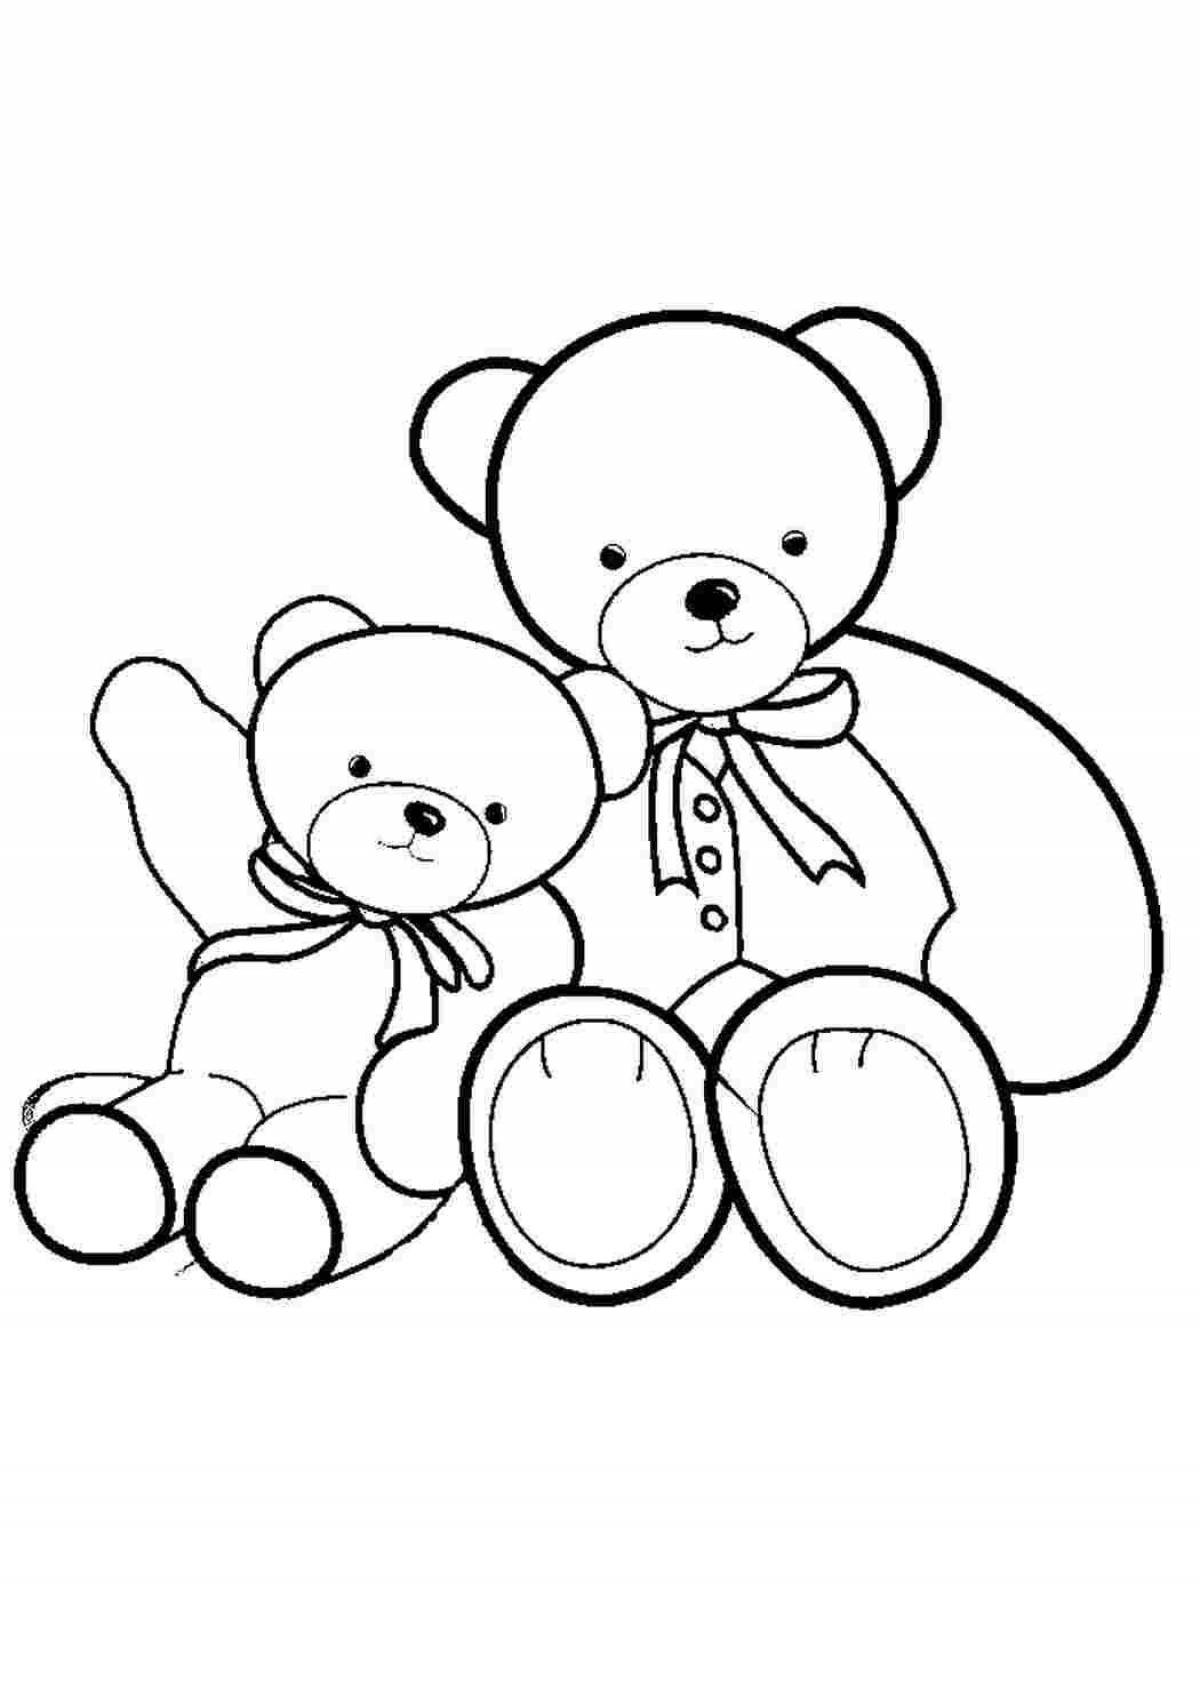 Coloring teddy bear during the game